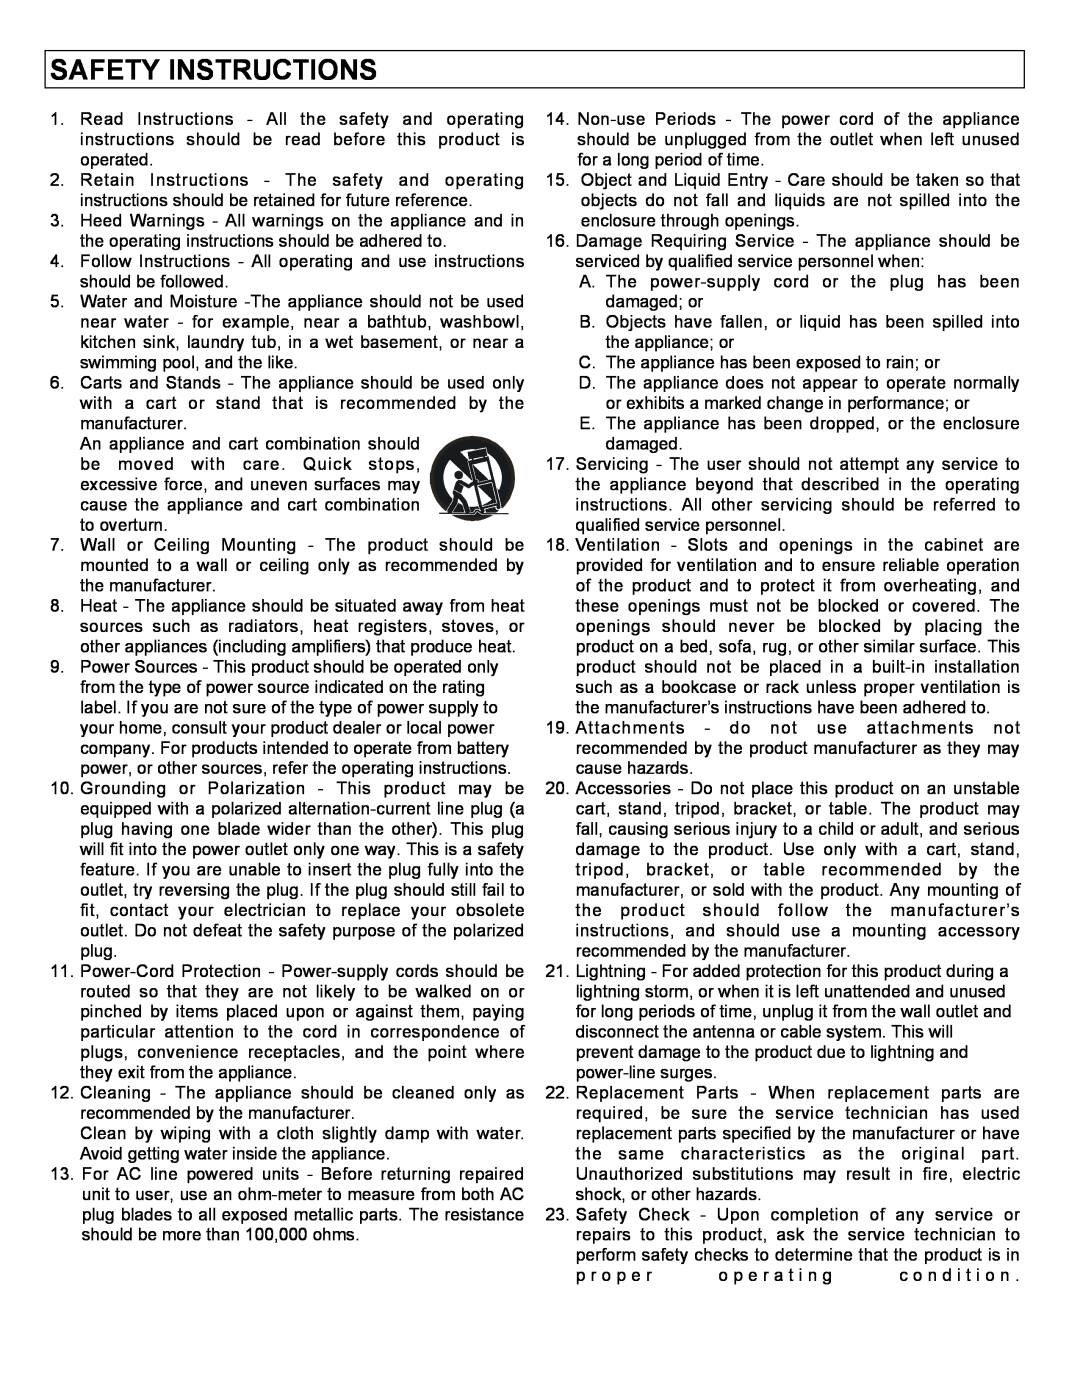 Stanton C-500 user manual Safety Instructions 